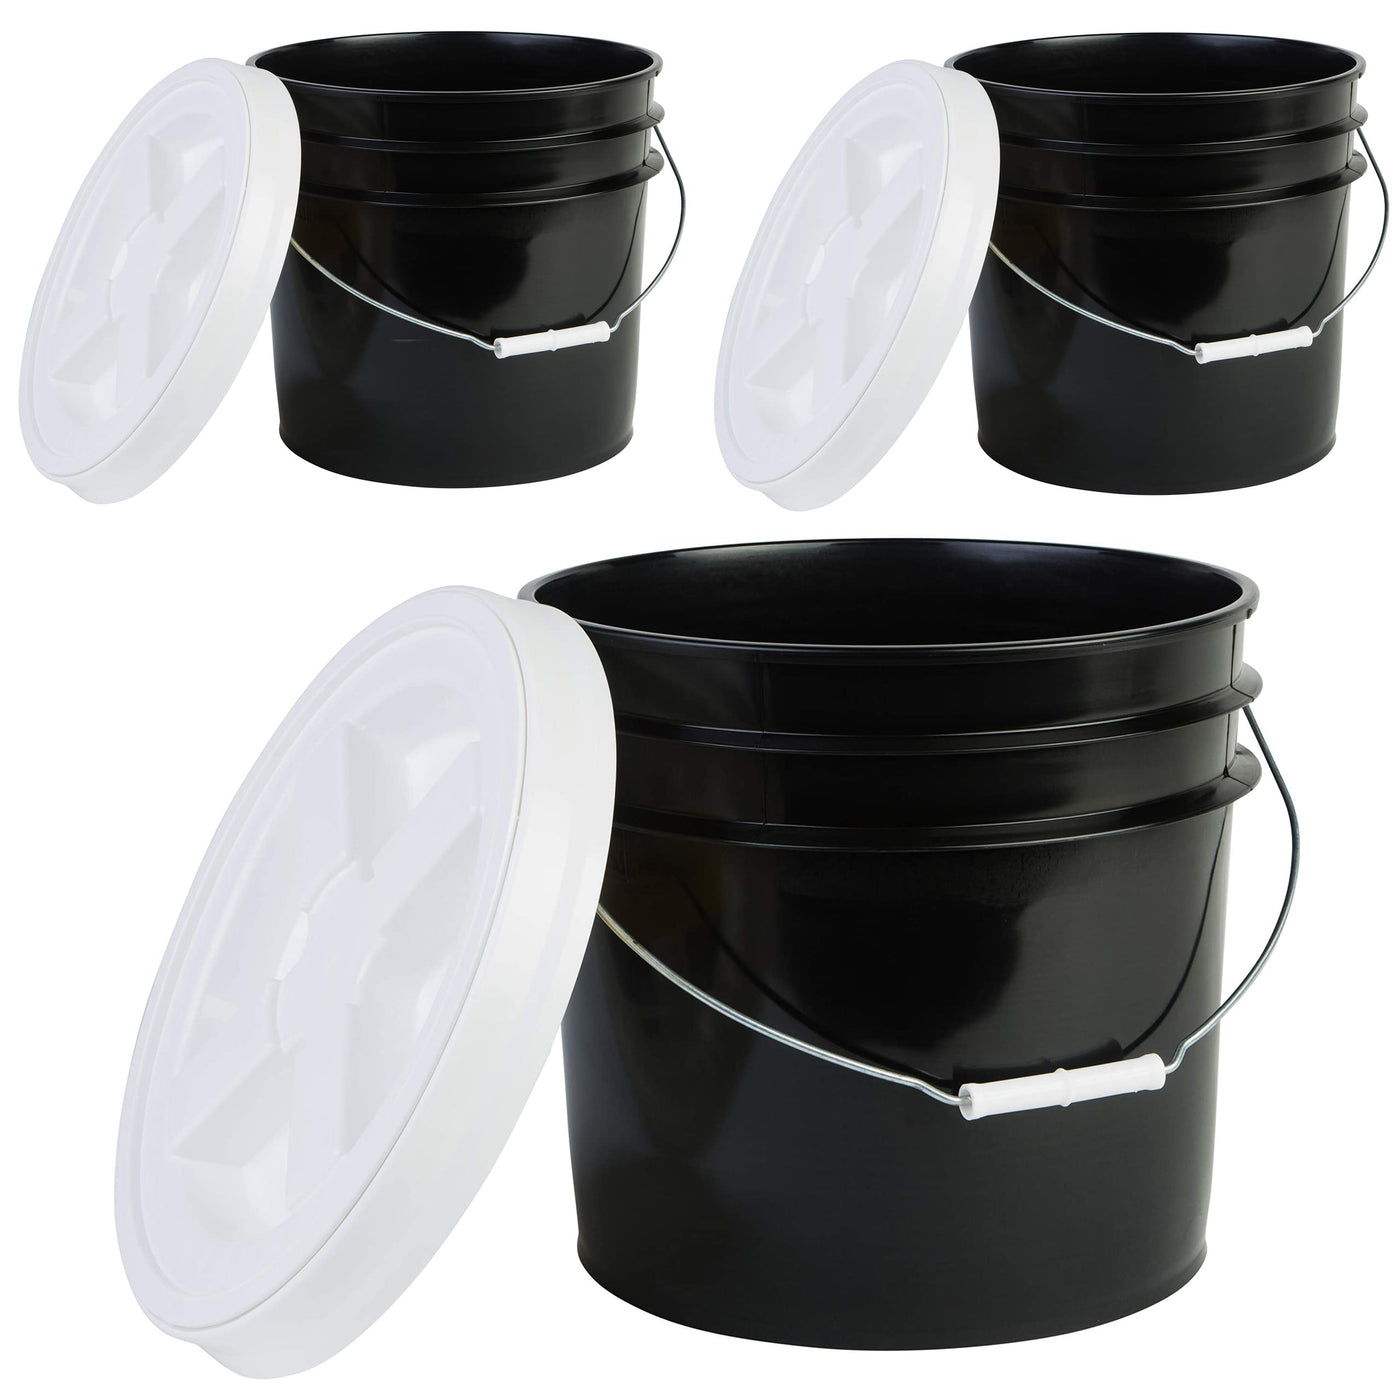  Consolidated Plastics 3.5 Gallon White Food Grade Buckets +  Black Gamma Seal Lids, BPA Free Container Storage, Durable HDPE Pails, Made  in USA (3 Pack) : Industrial & Scientific